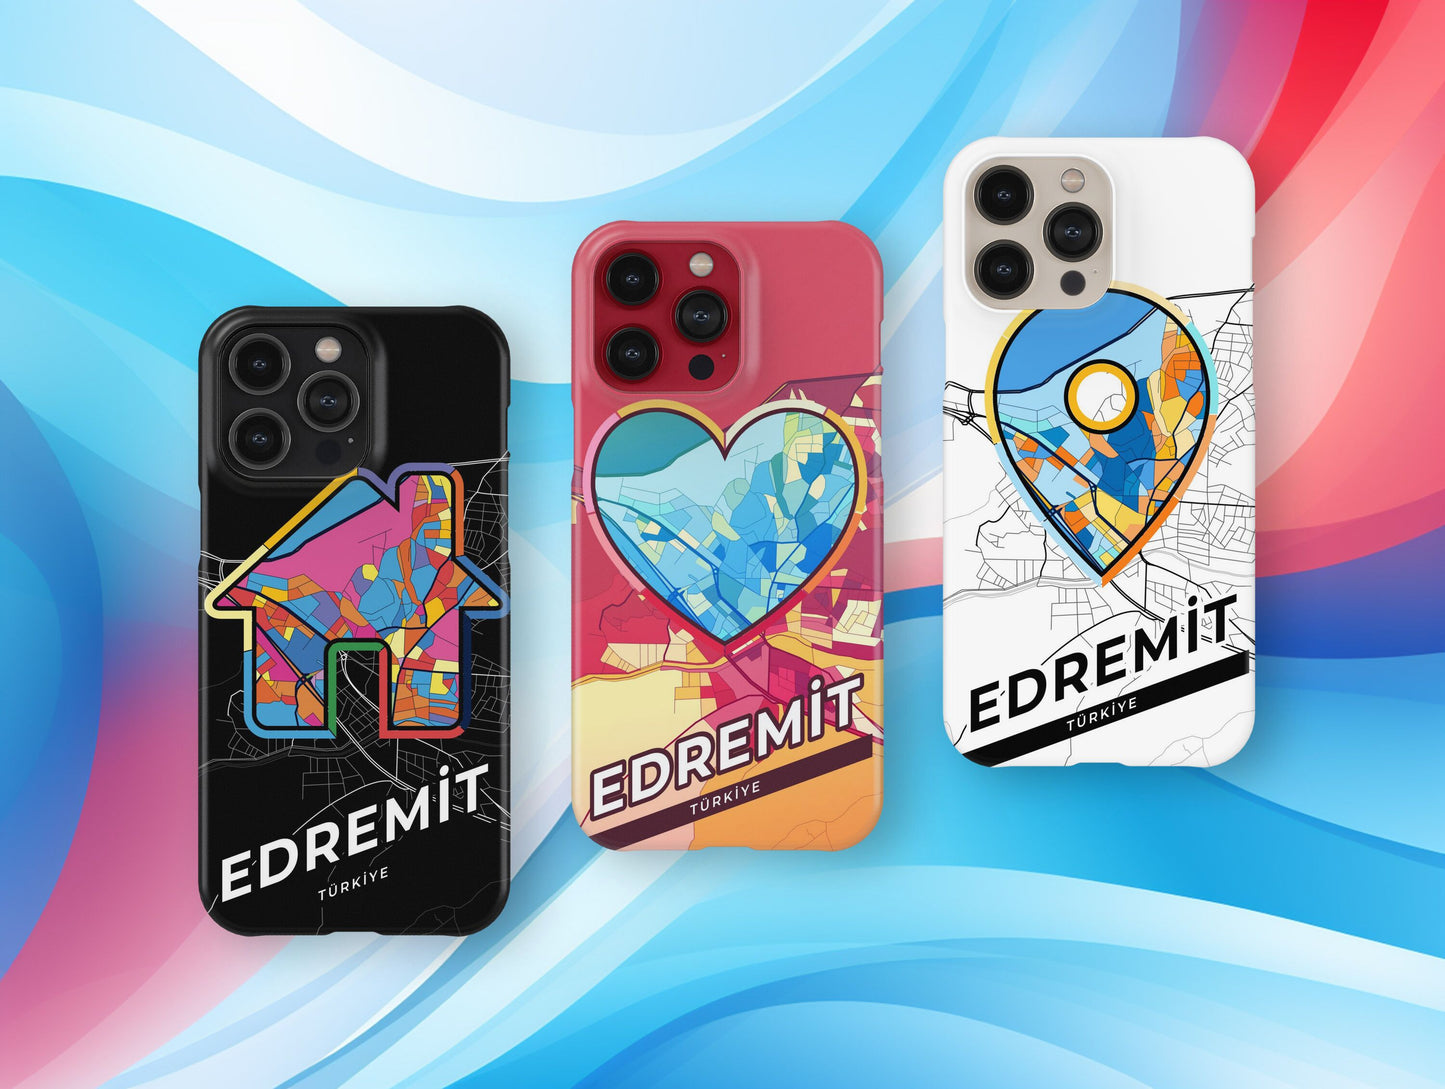 Edremit Turkey slim phone case with colorful icon. Birthday, wedding or housewarming gift. Couple match cases.